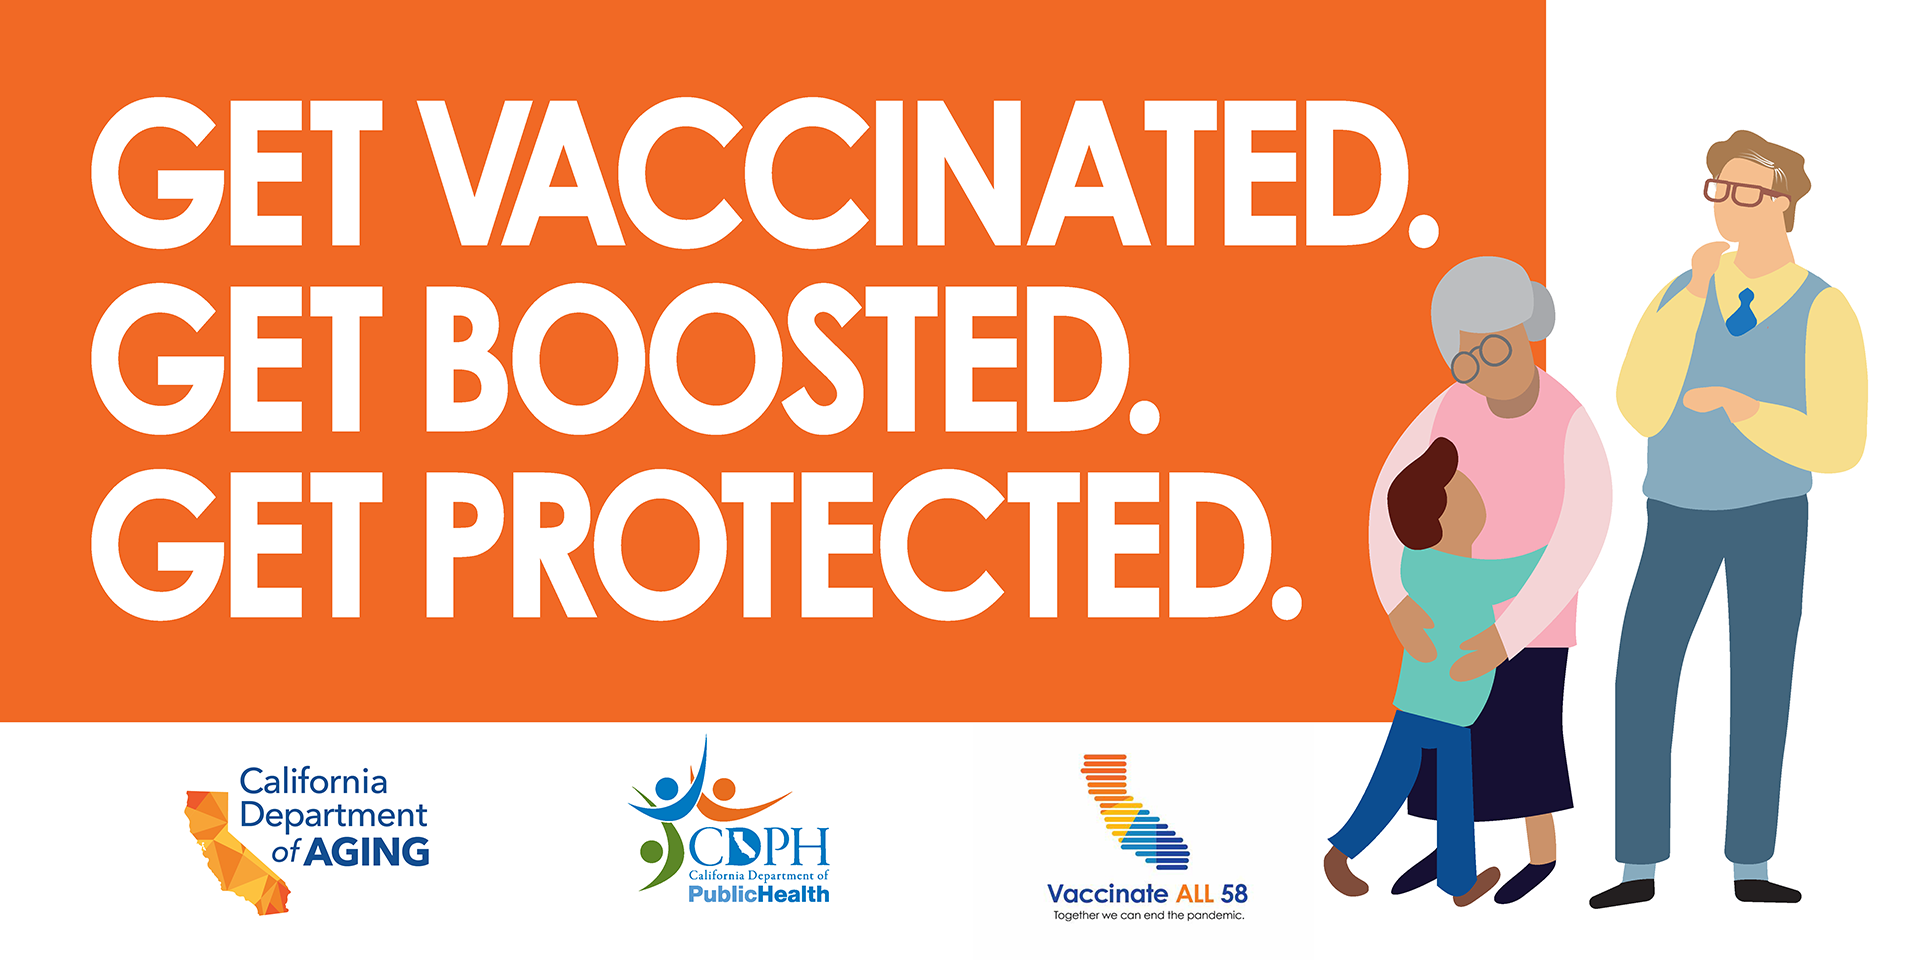 Get Vaccinated. Get Boosted. Get Protected. White words on orange background with three individuals on the right side of the image.